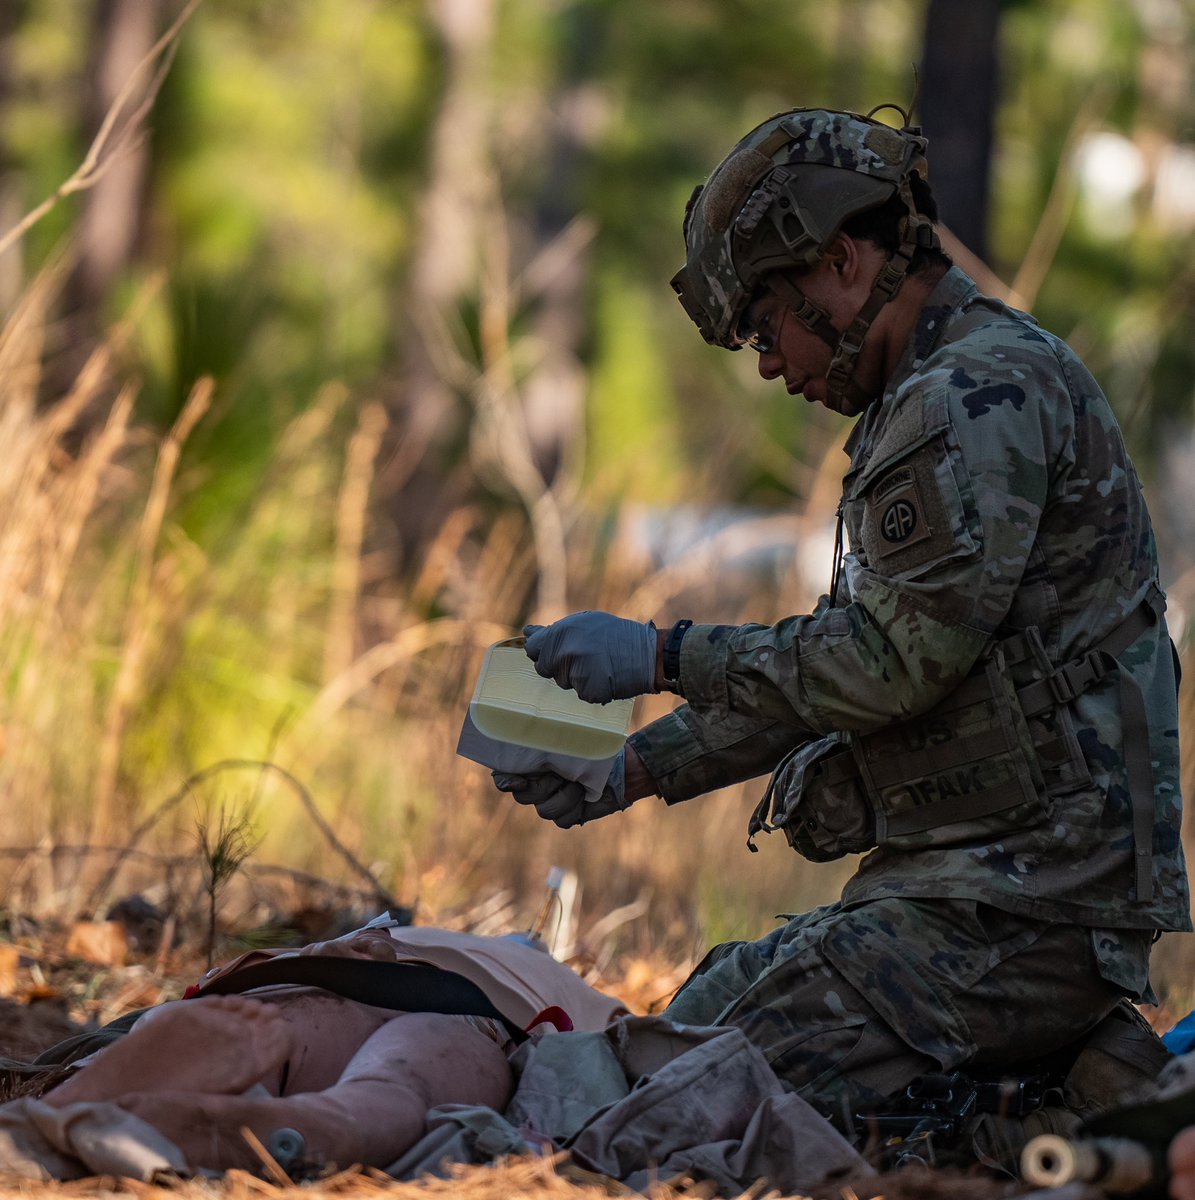 Day 2 of #E3B Testing: Our #FalconParatroopers began their first day of lane evaluations, focusing on patrol, weapons, or medical tasks. Candidates spent the day at their designated lanes, completing a series of tasks that must be executed perfectly to #EarntheBadge. LET’S GO!